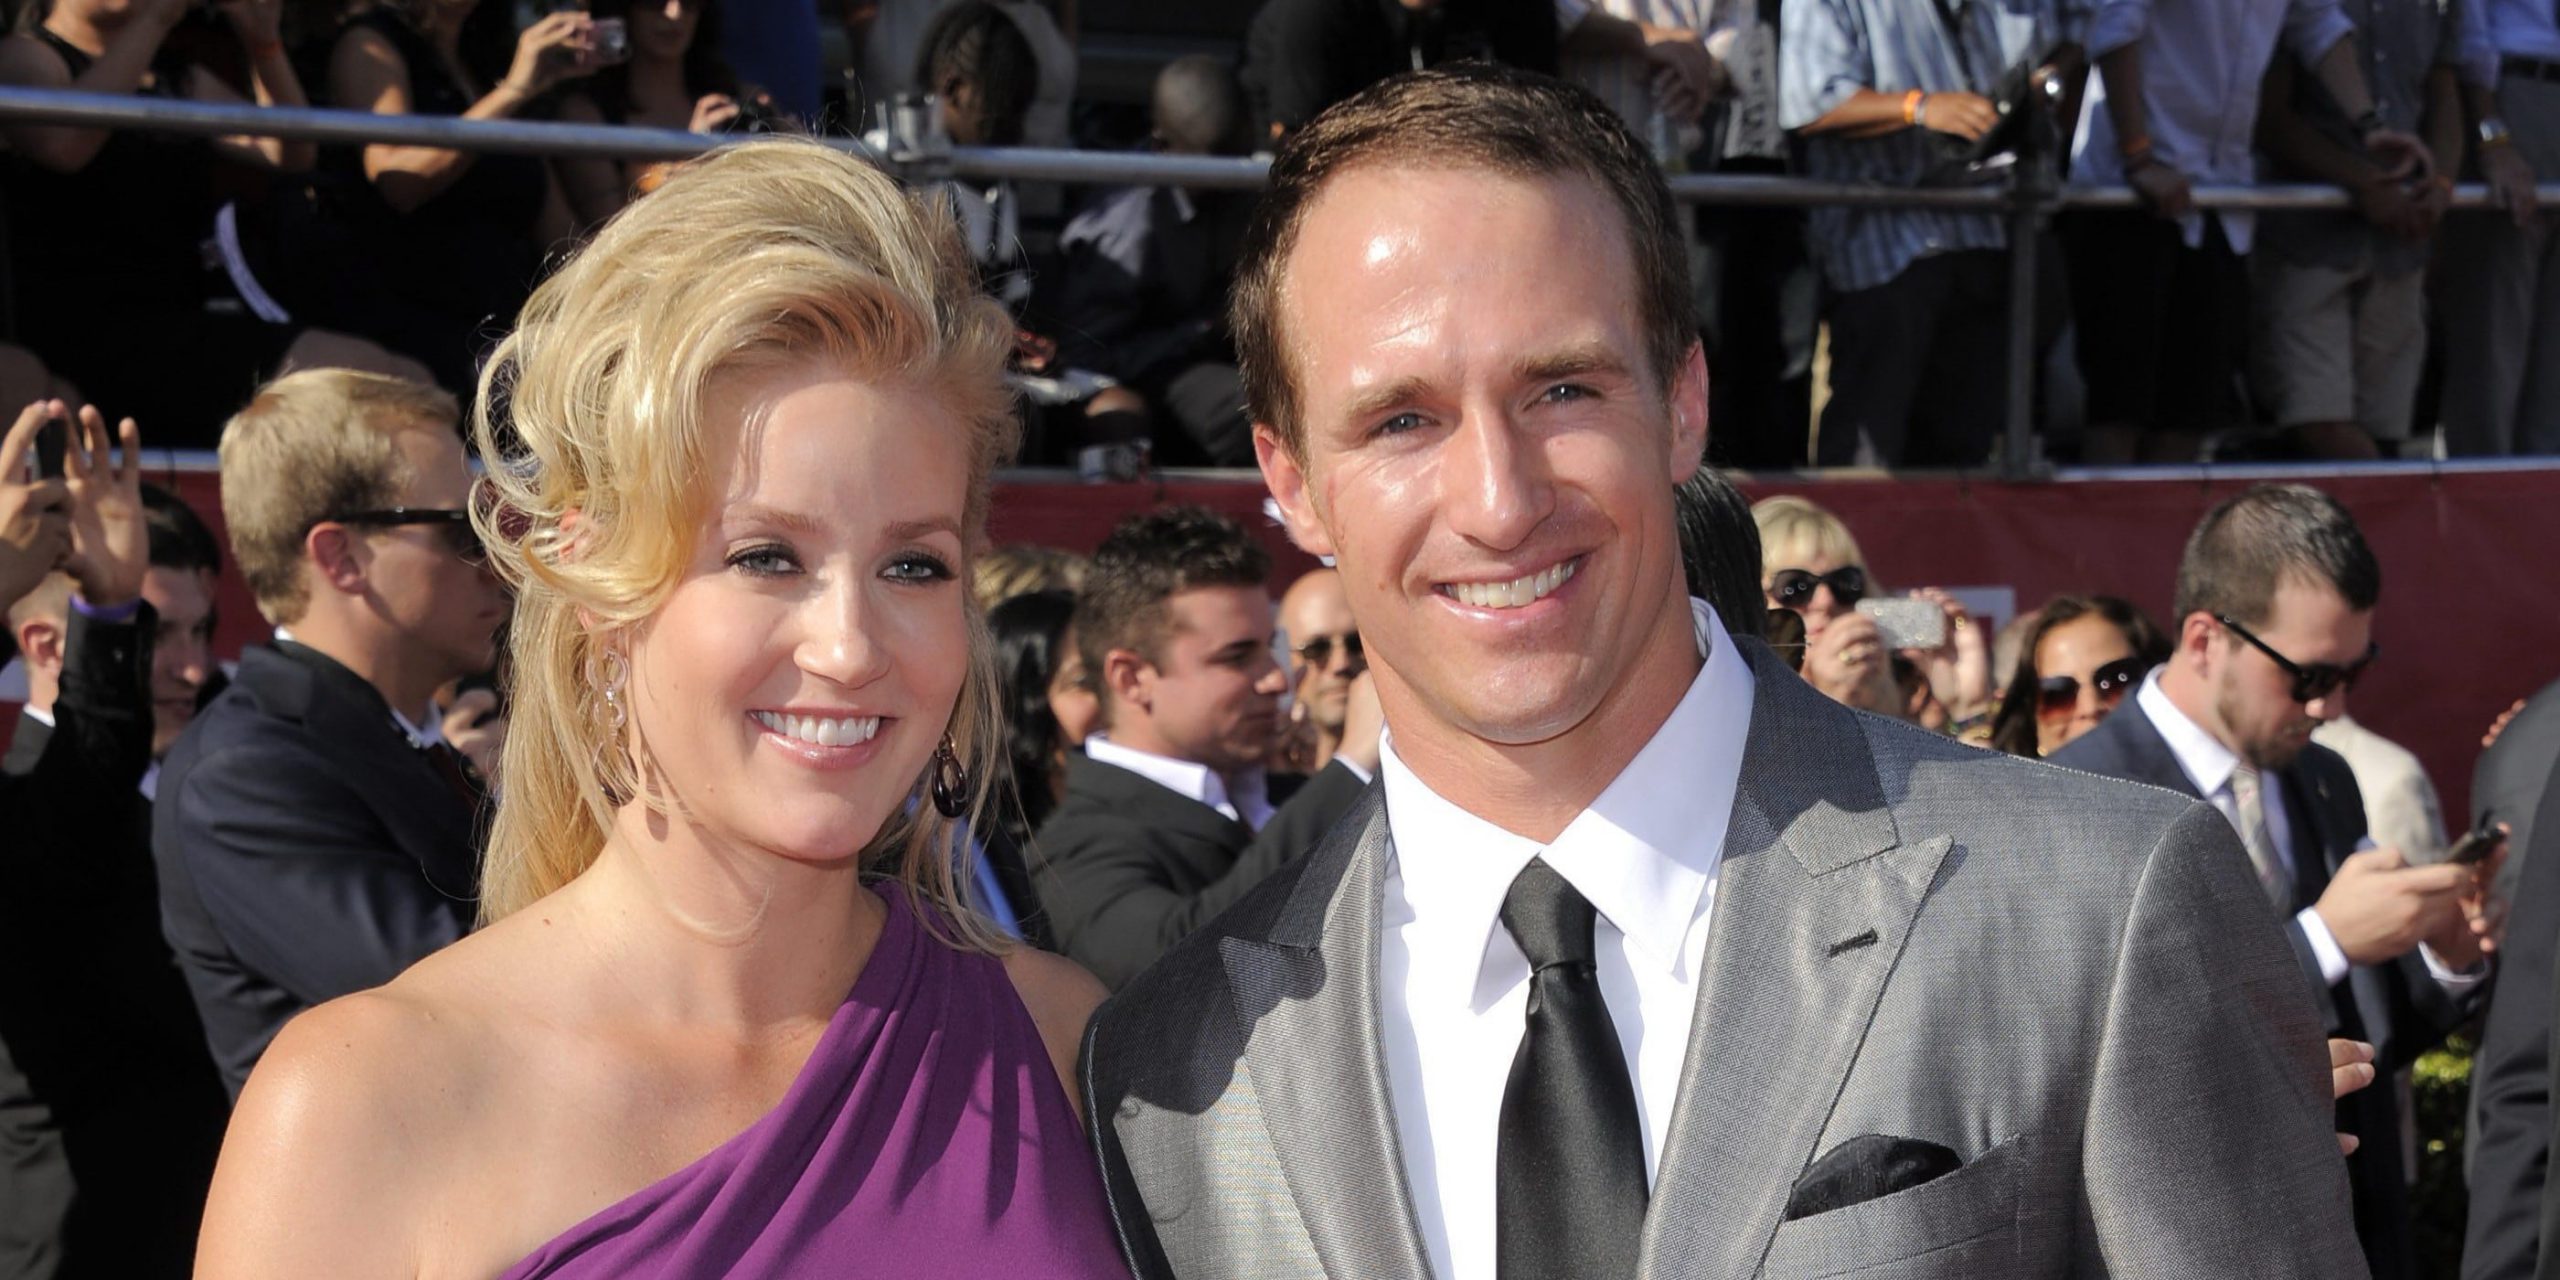 Who's Drew Brees' wife Brittany Brees? Wiki: Age, Net Worth, Job, Height